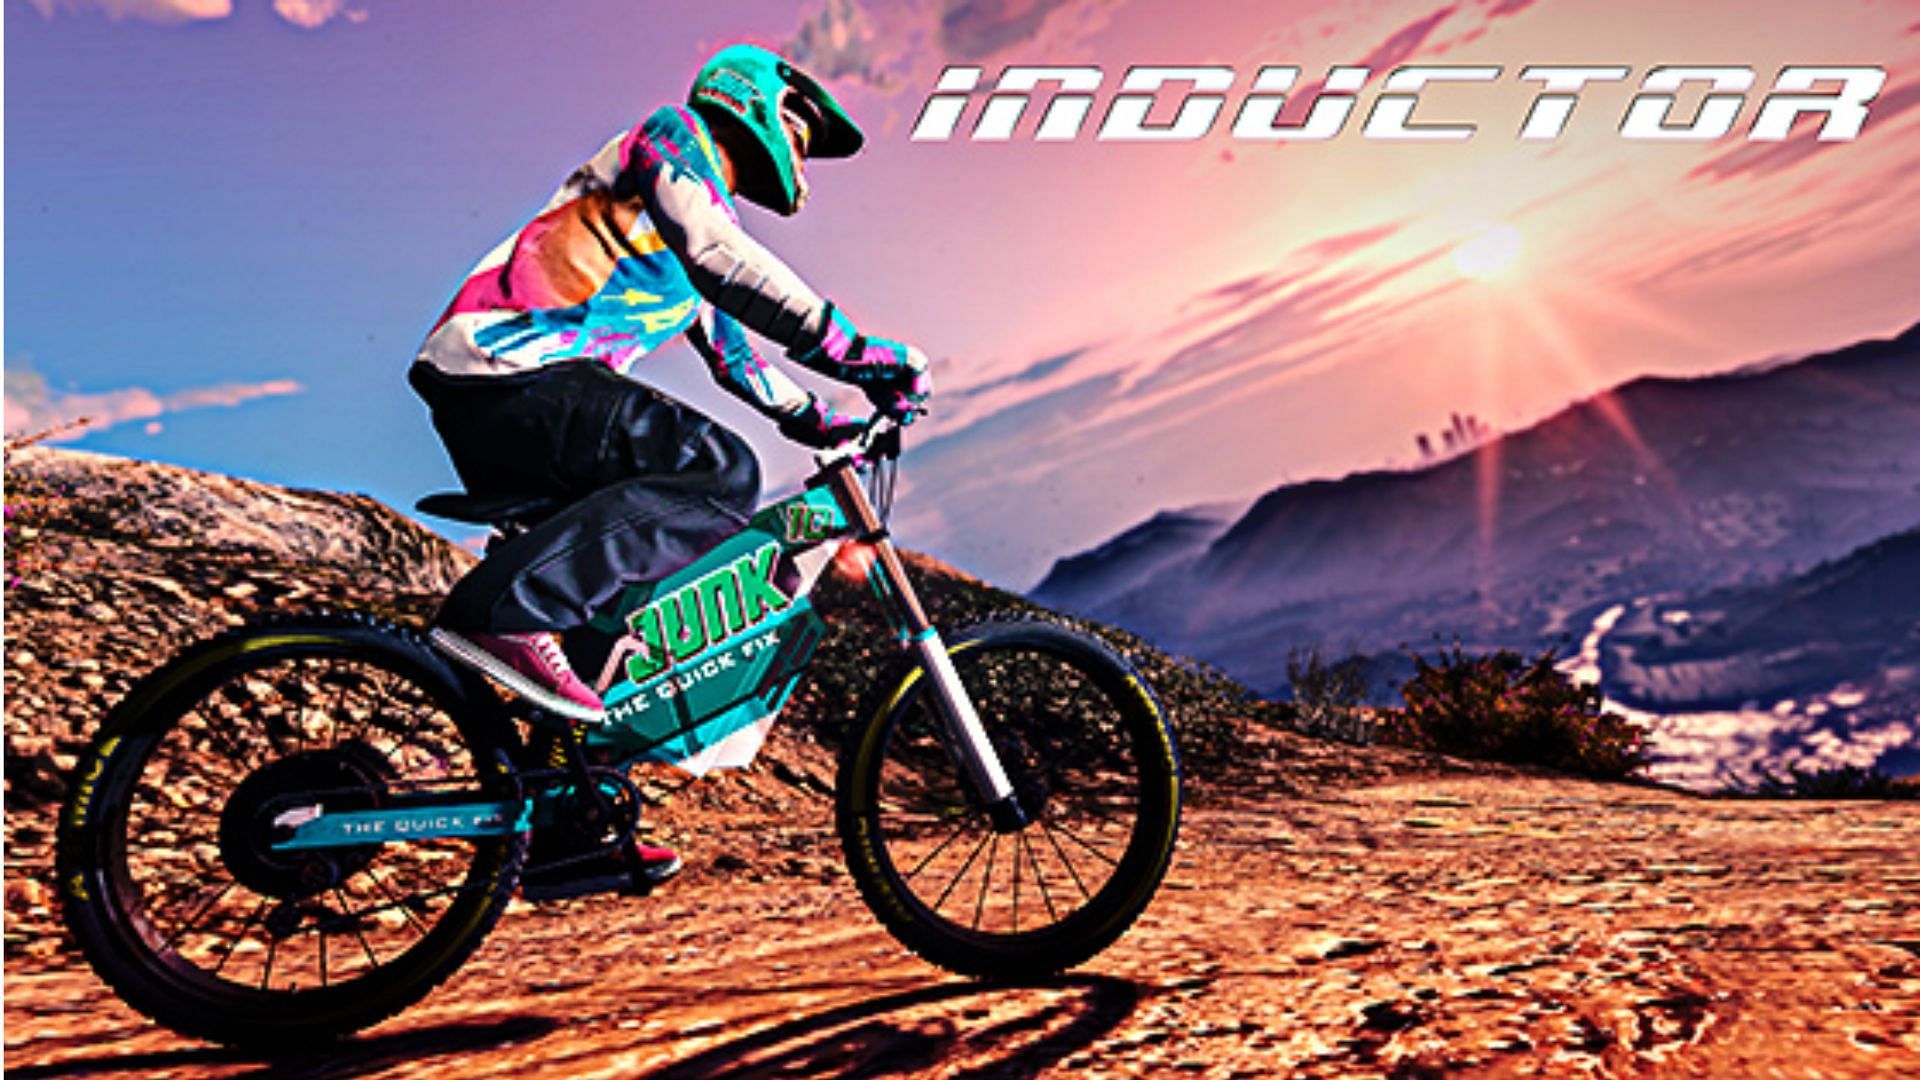 The new Inductor electric bike (Image via Rockstar Games)